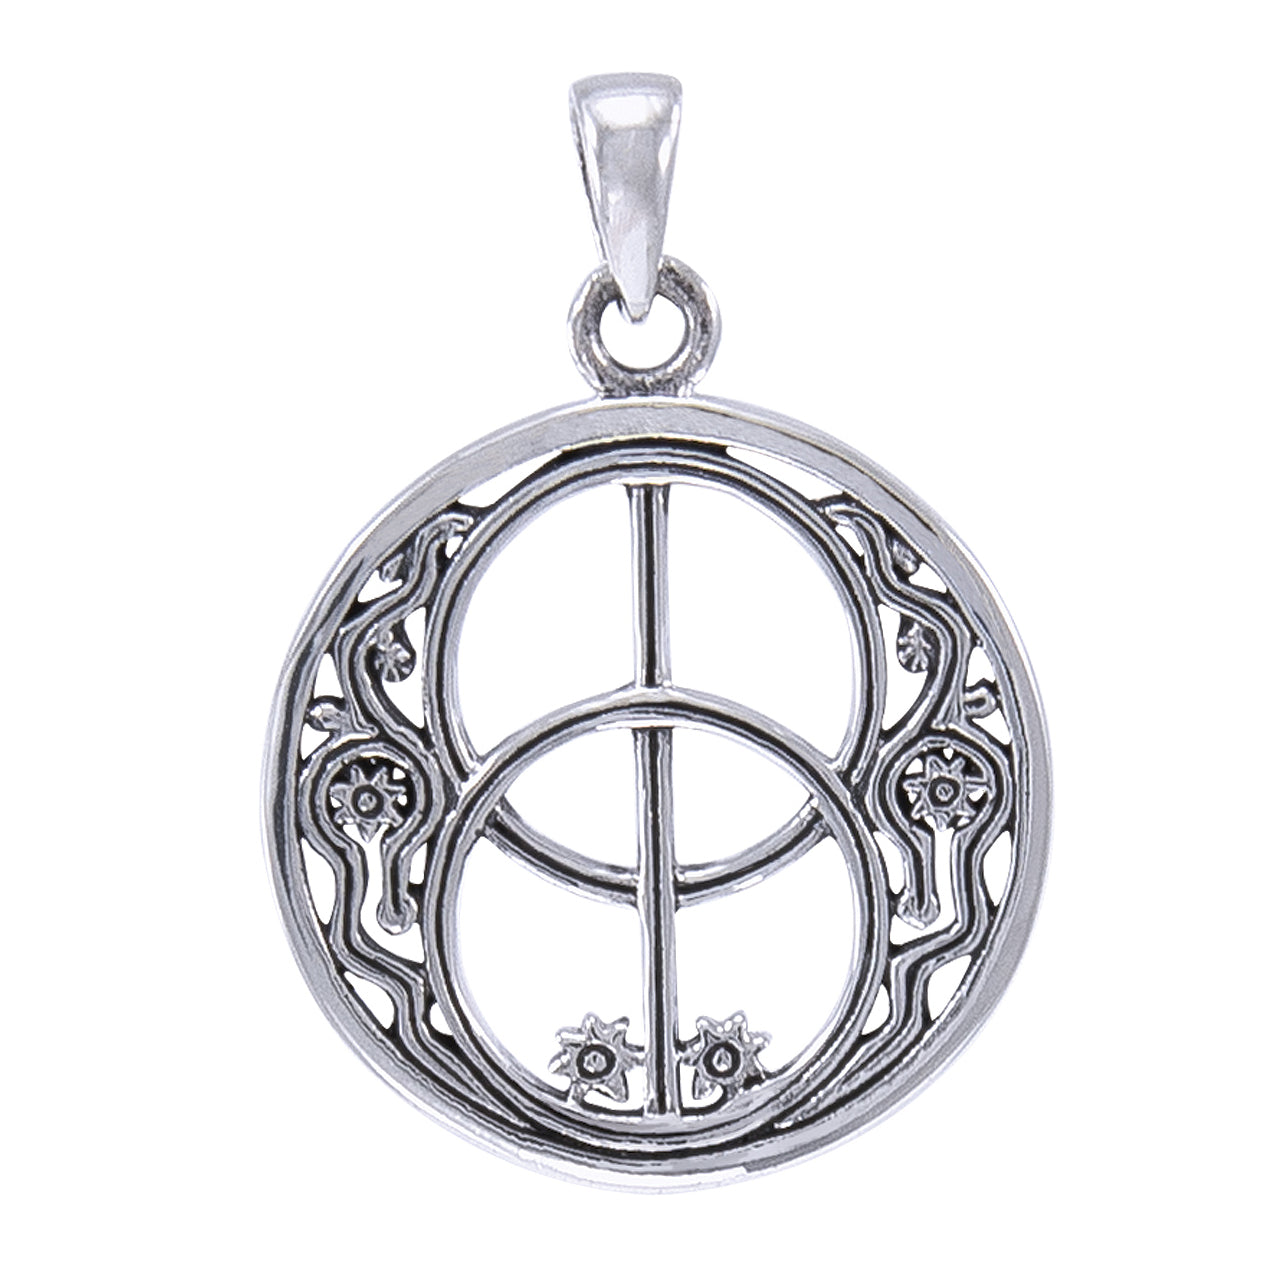 Sacred Chalice Well Symbol of Avalon in Glastonbury Sterling Silver Pendant - Silver Insanity